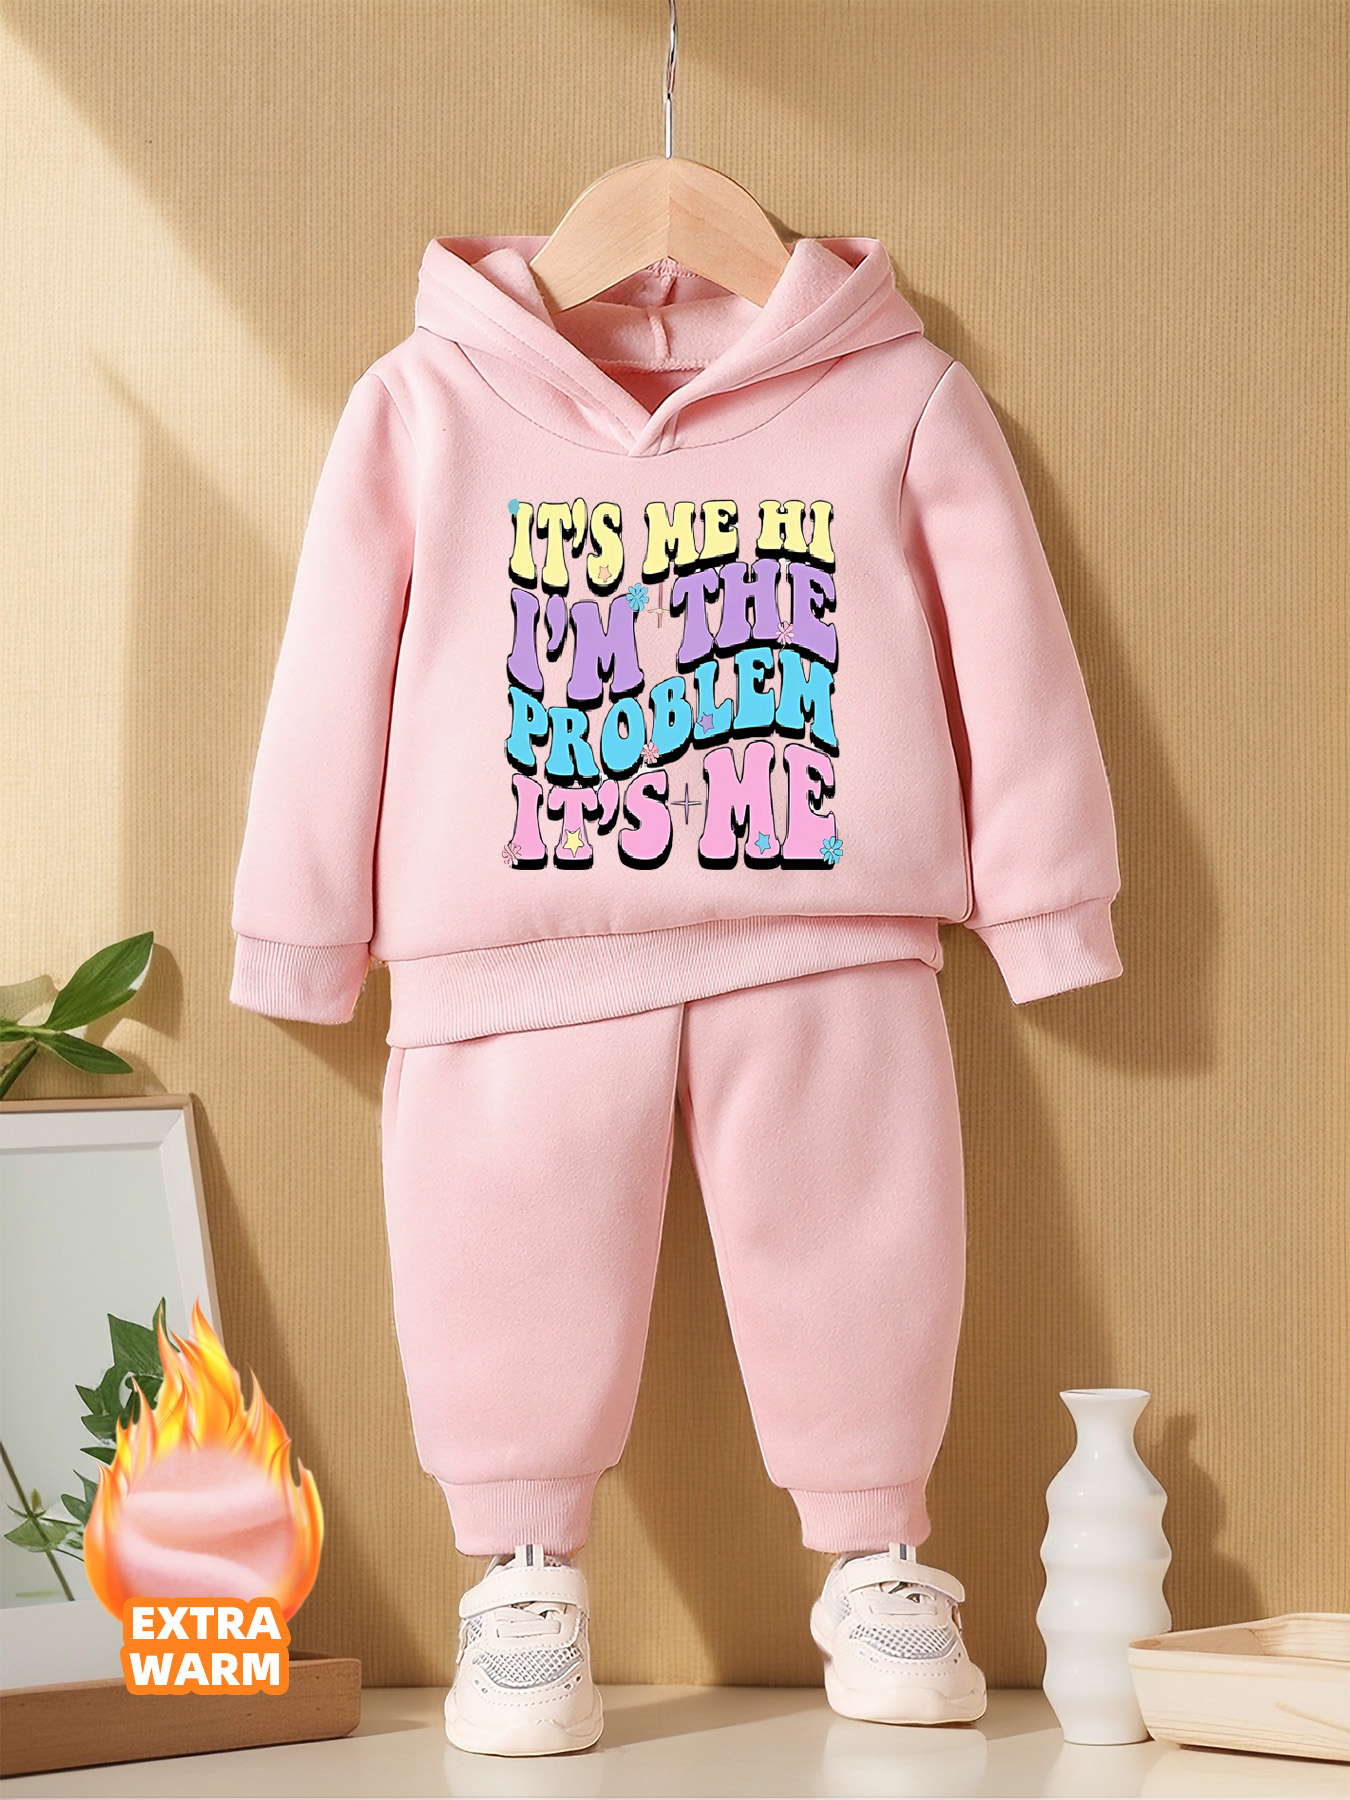 2pcs/set Little Girls' Cute & Romantic Letter Print Hooded Sweatshirt And  Pants Set With Fleece Lining For Winter